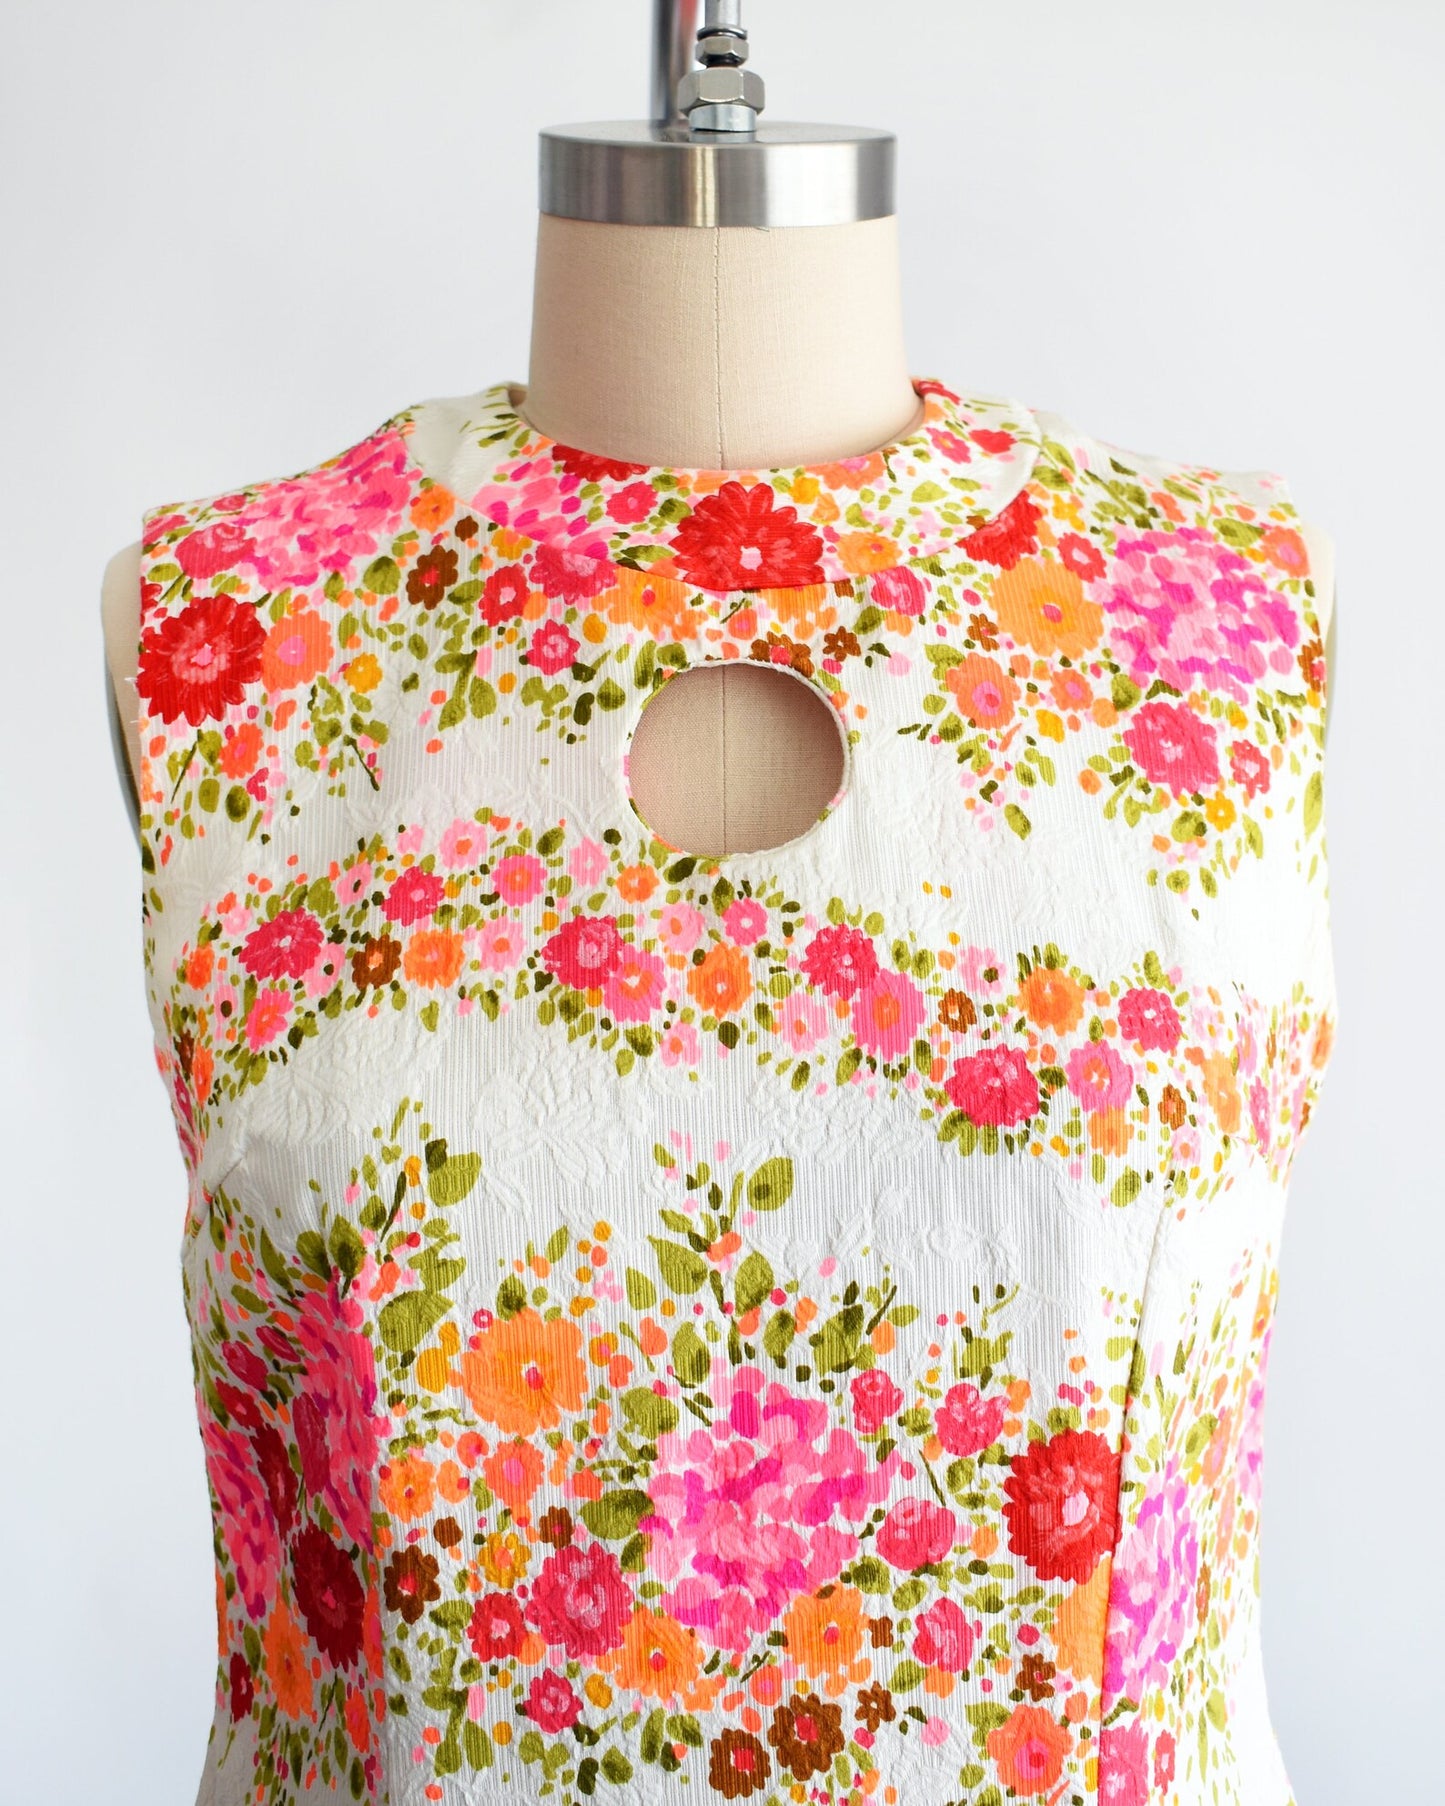 Close up of the vibrant pink, orange, and green floral print and the circle cut out under the collar on the dress. The dress is on a dress form.